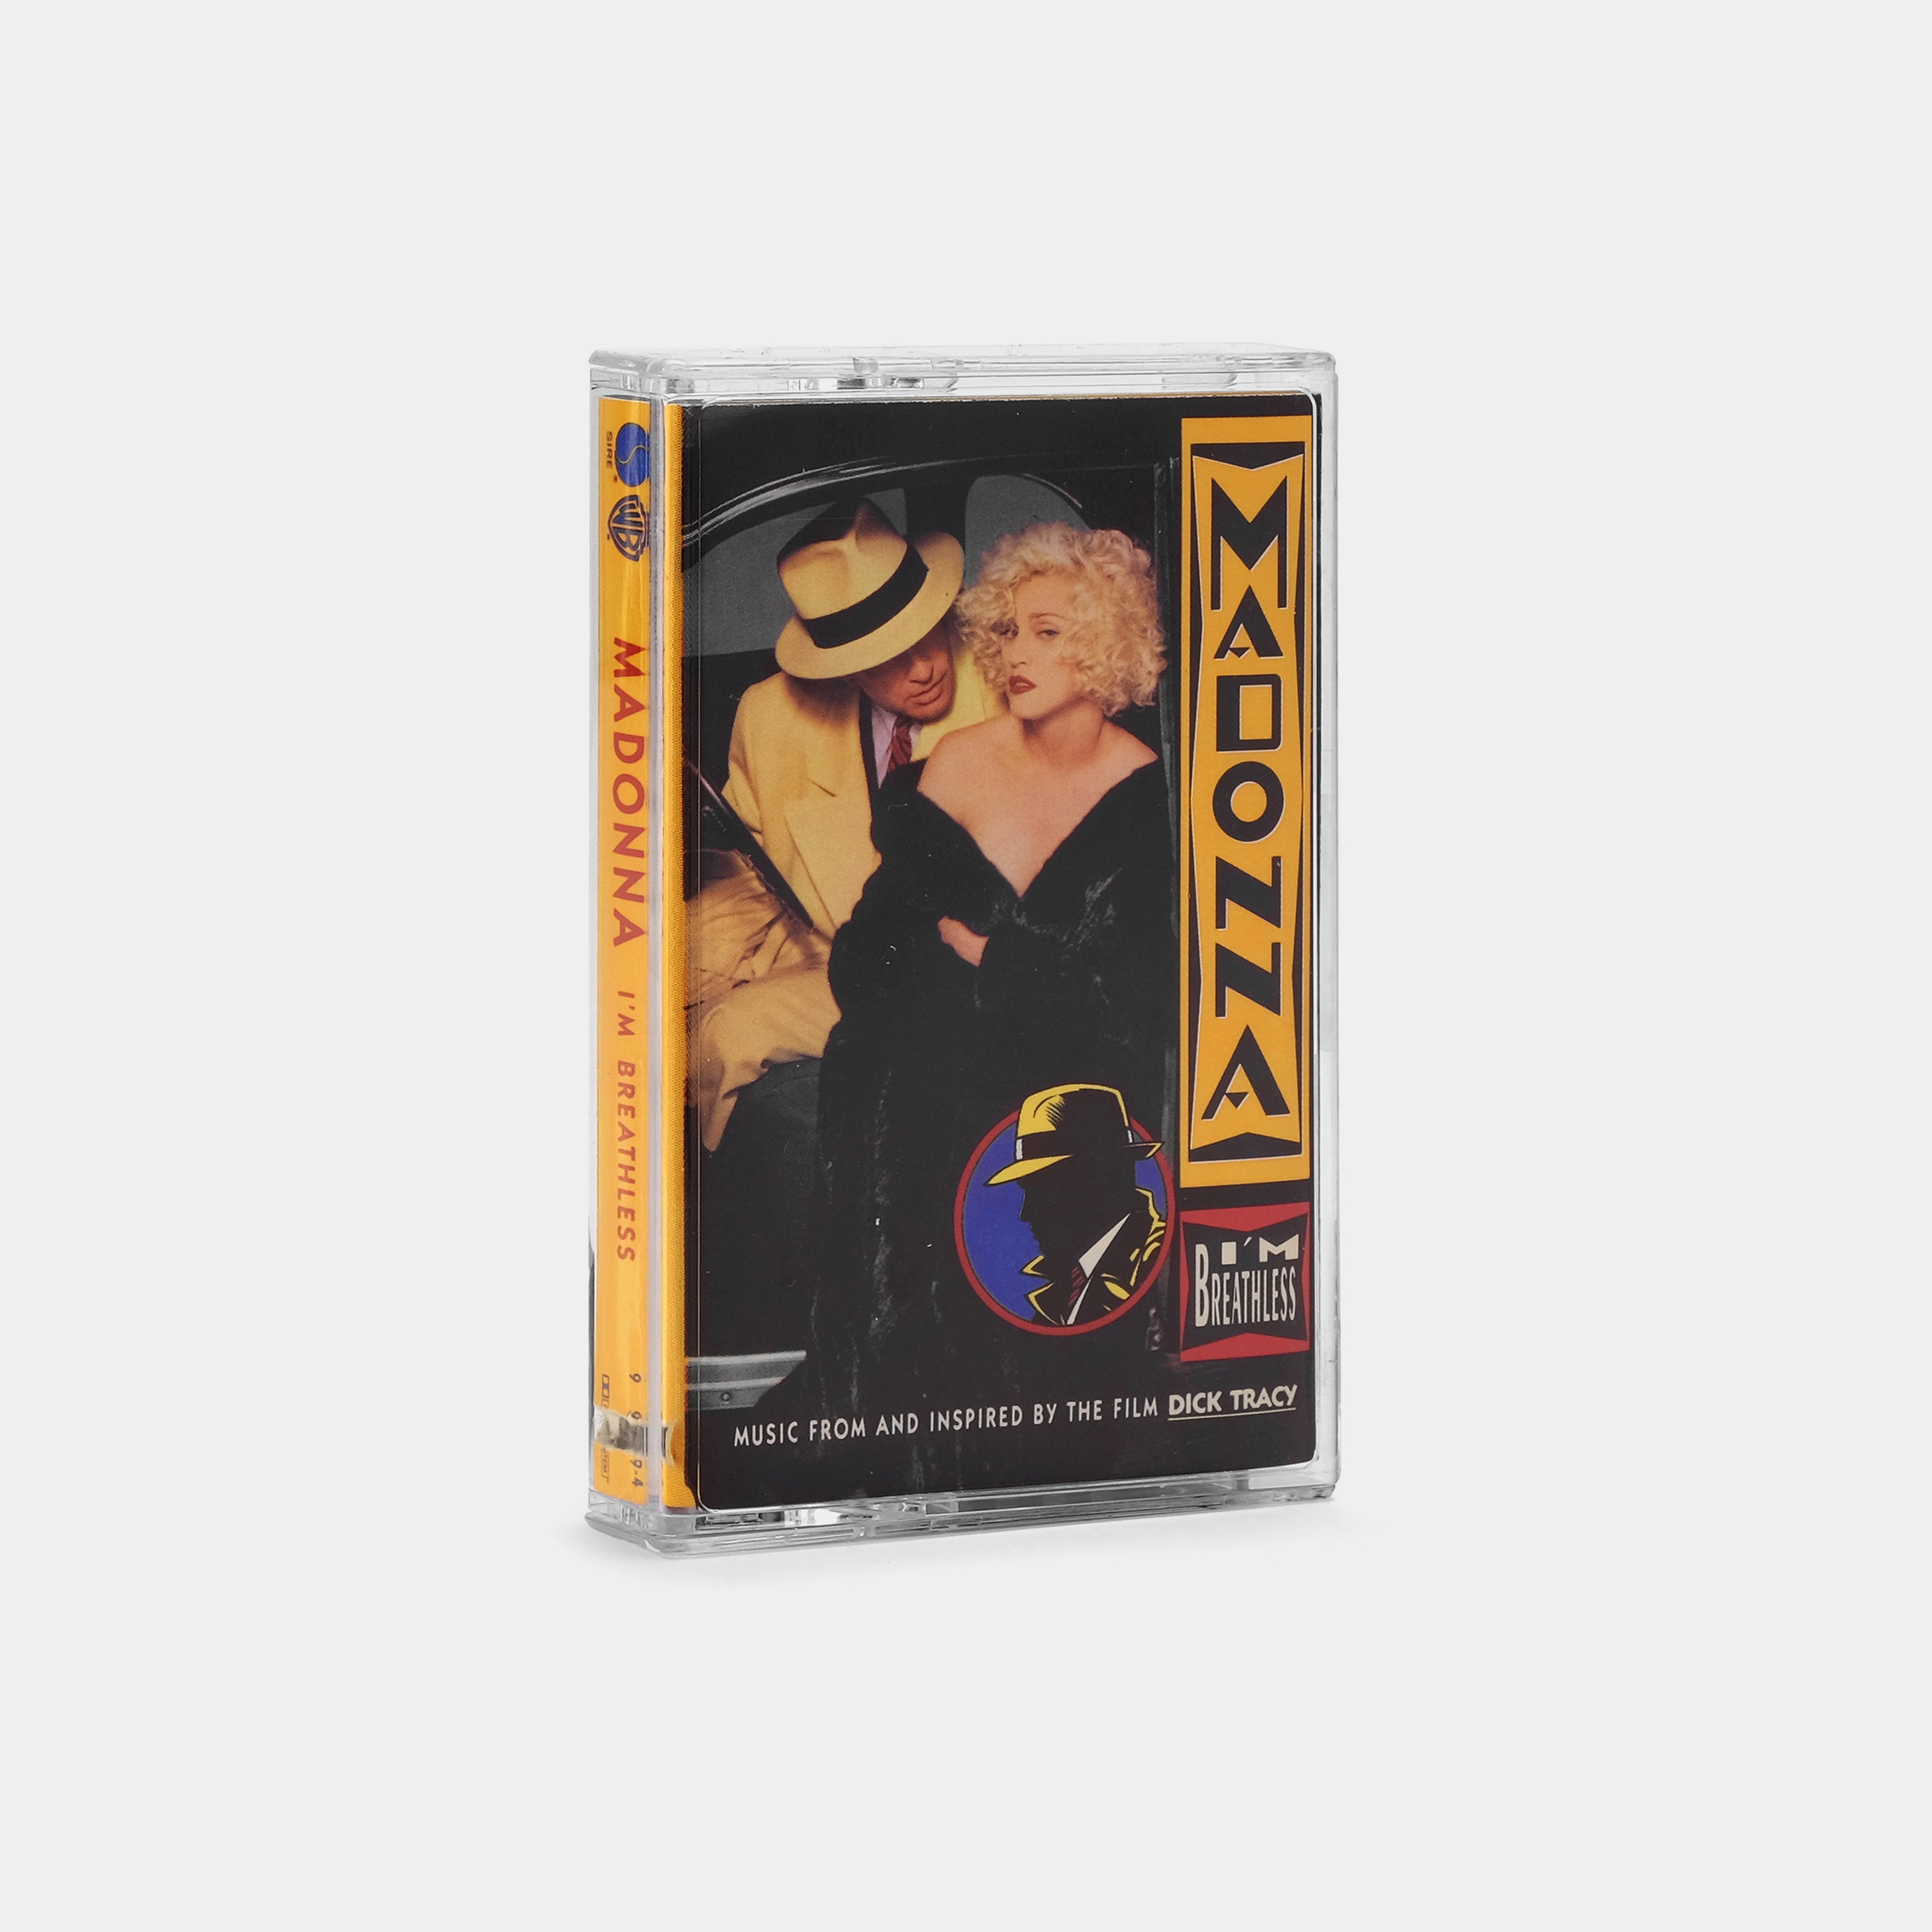 Madonna - I'm Breathless (Music From And Inspired By The Film Dick Tracy) Cassette Tape